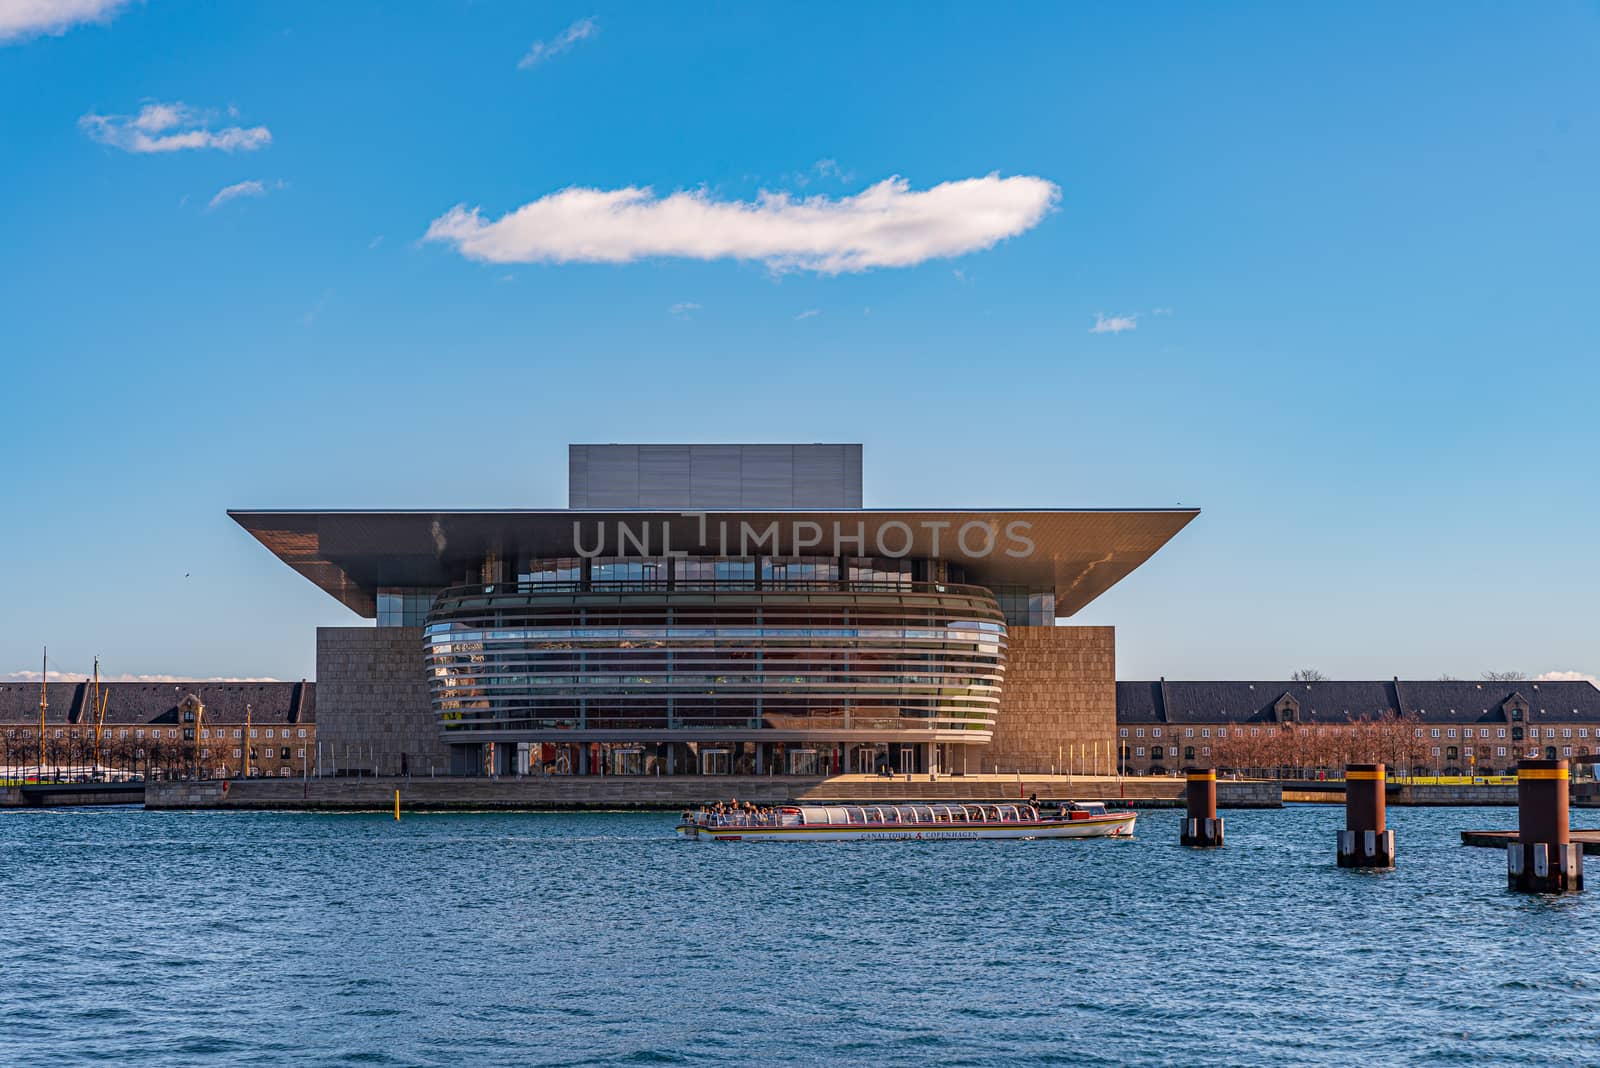 Copenhagen Opera House at dusk, horizontal image of building on water, contemporary European architecture